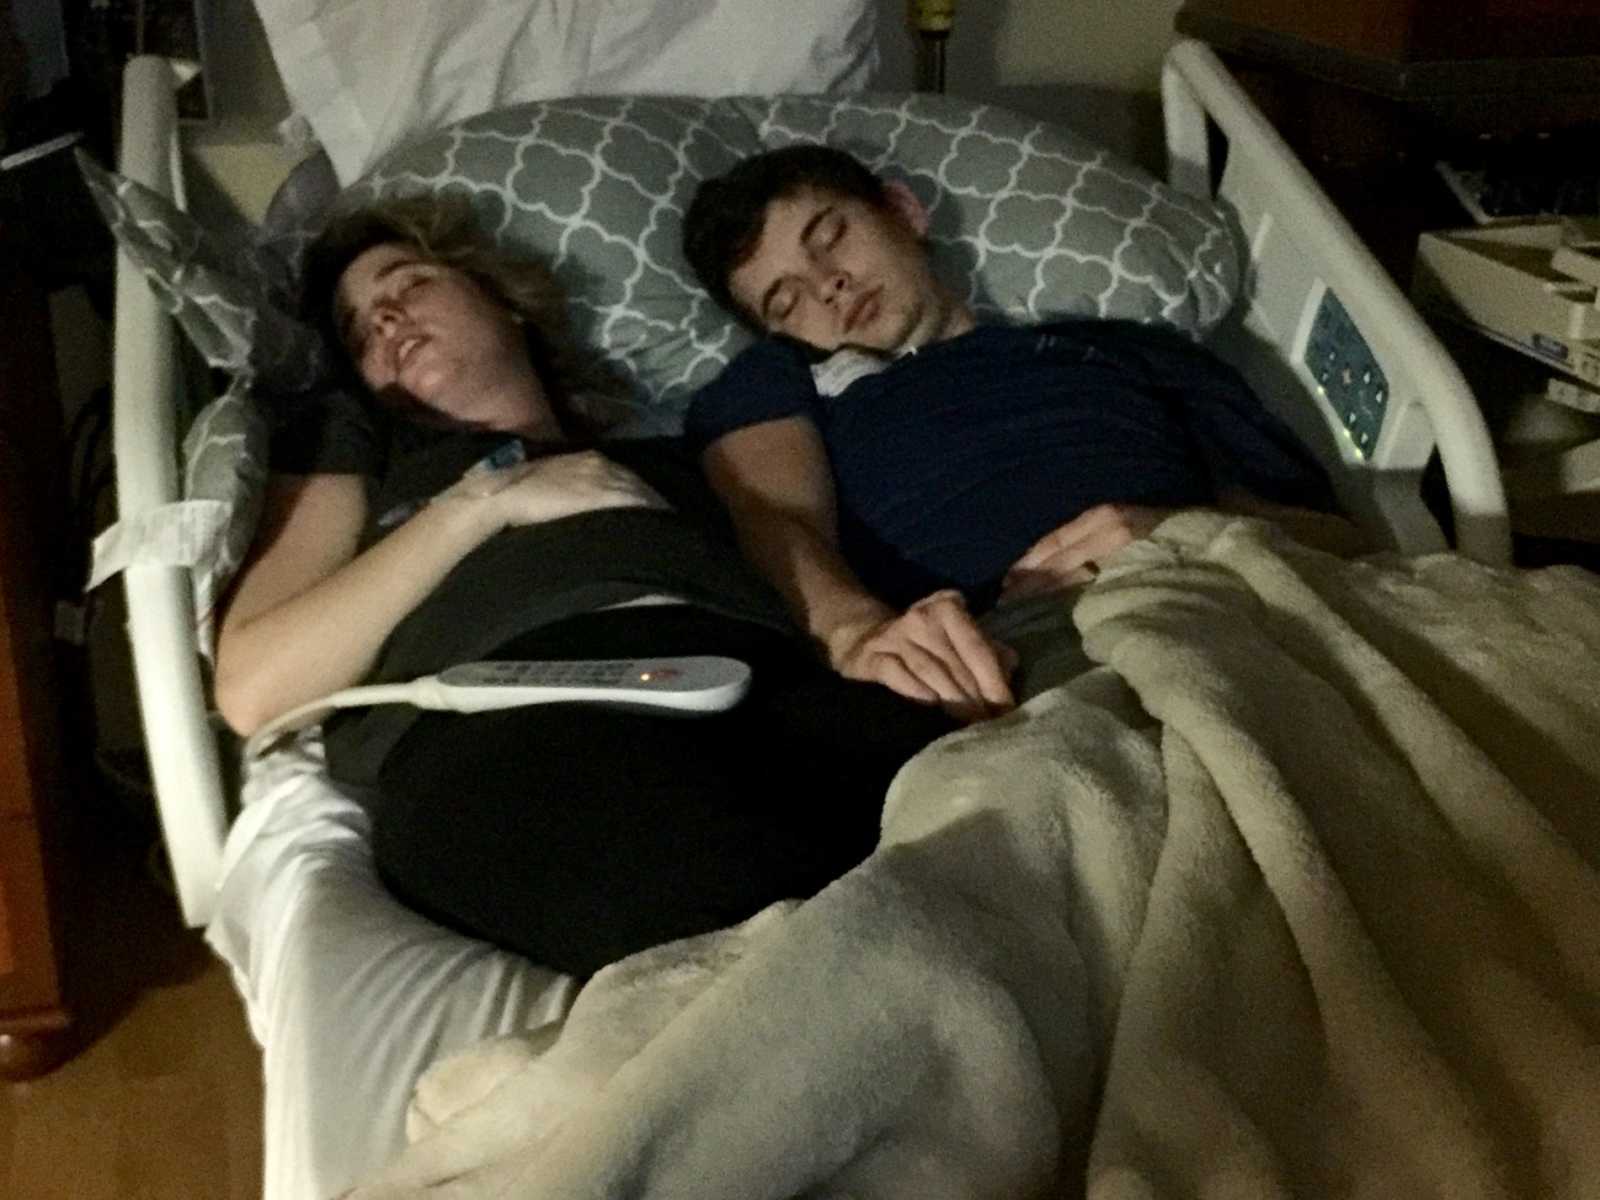 Pregnant wife asleep in hospital bed next to husband